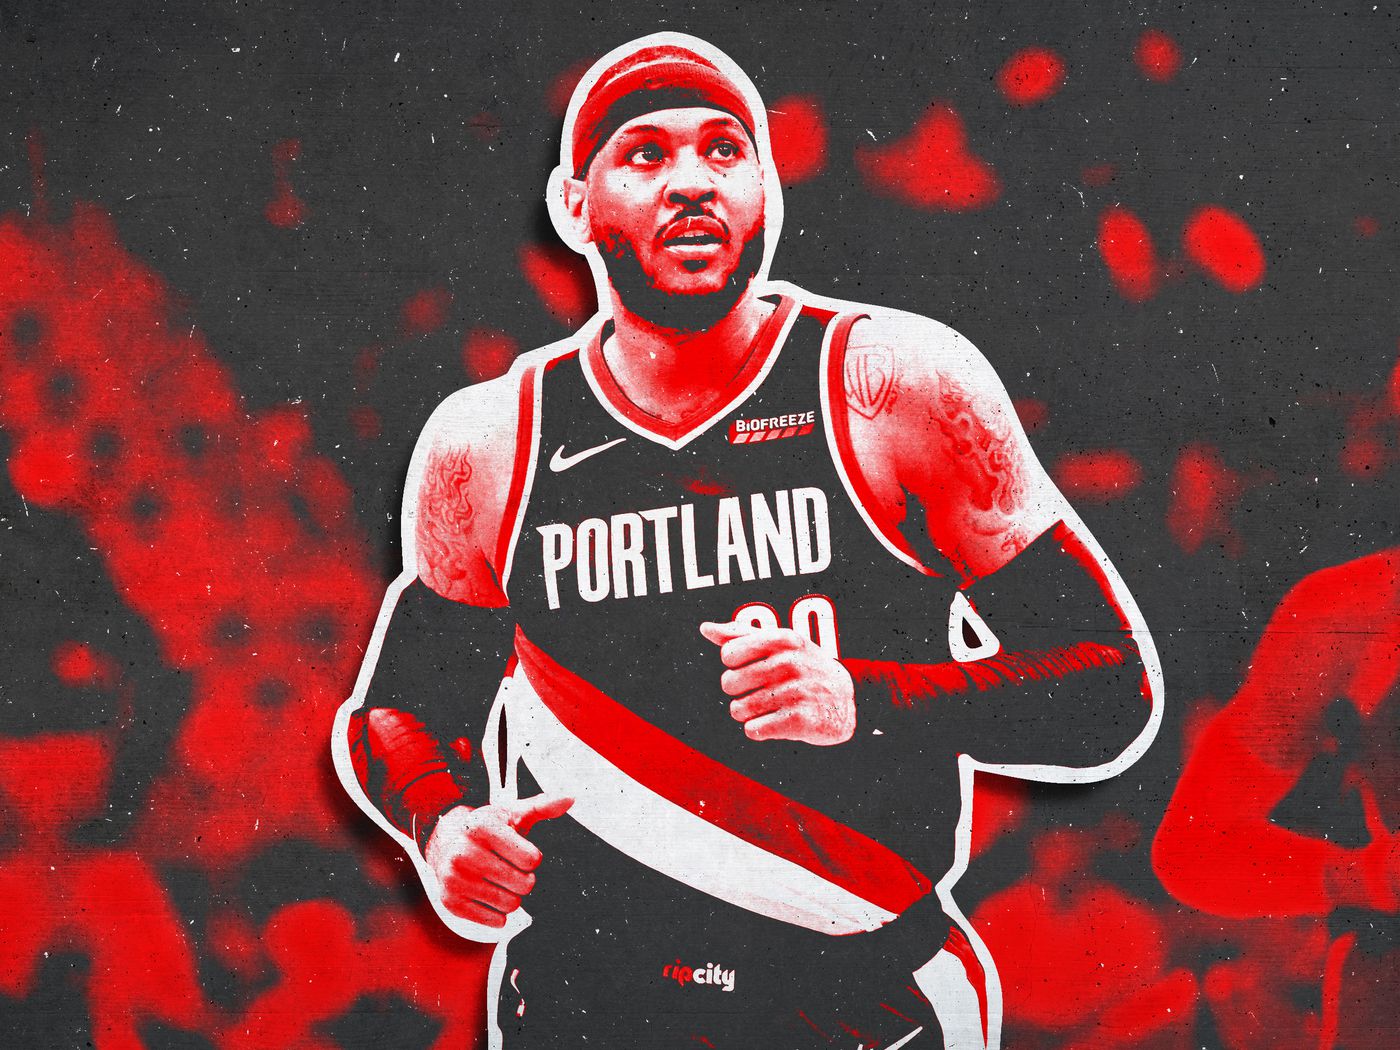 Carmelo S Trail Blazers Debut Raises More Questions Than Answers